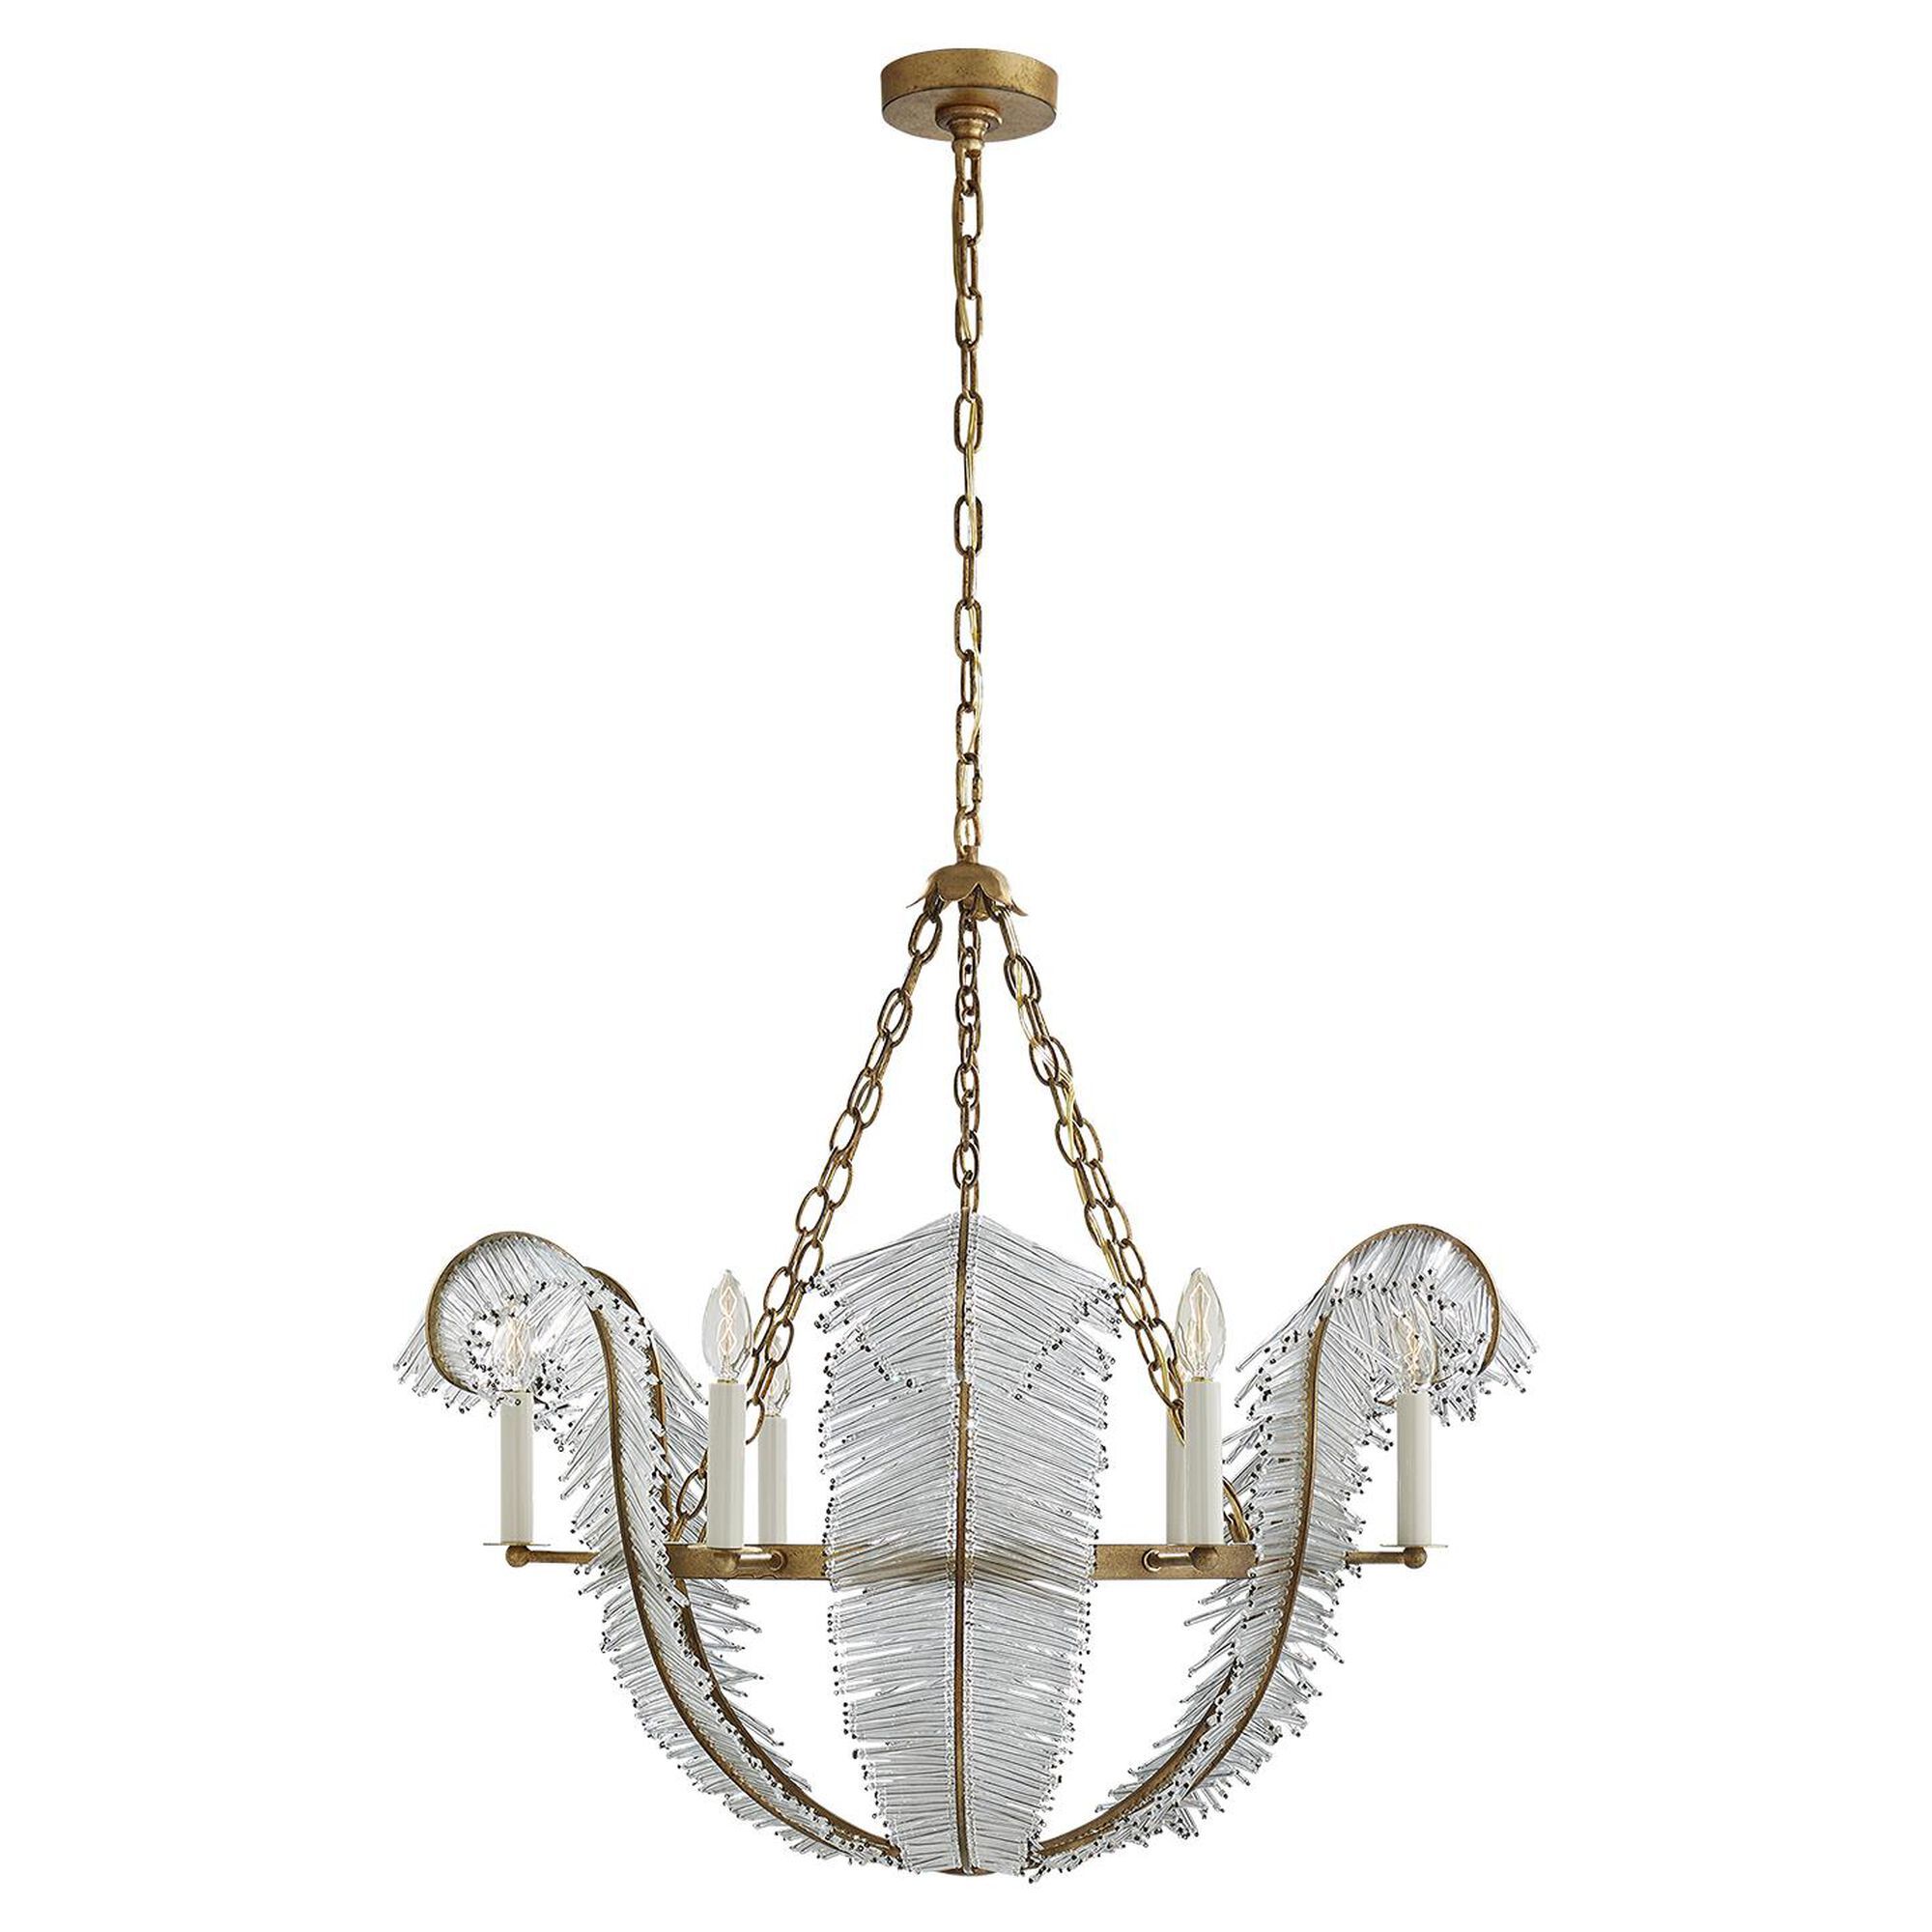 Niermann Weeks Calais 34 Inch 6 Light Chandelier by Visual Comfort and Co. | Capitol Lighting 1800lighting.com